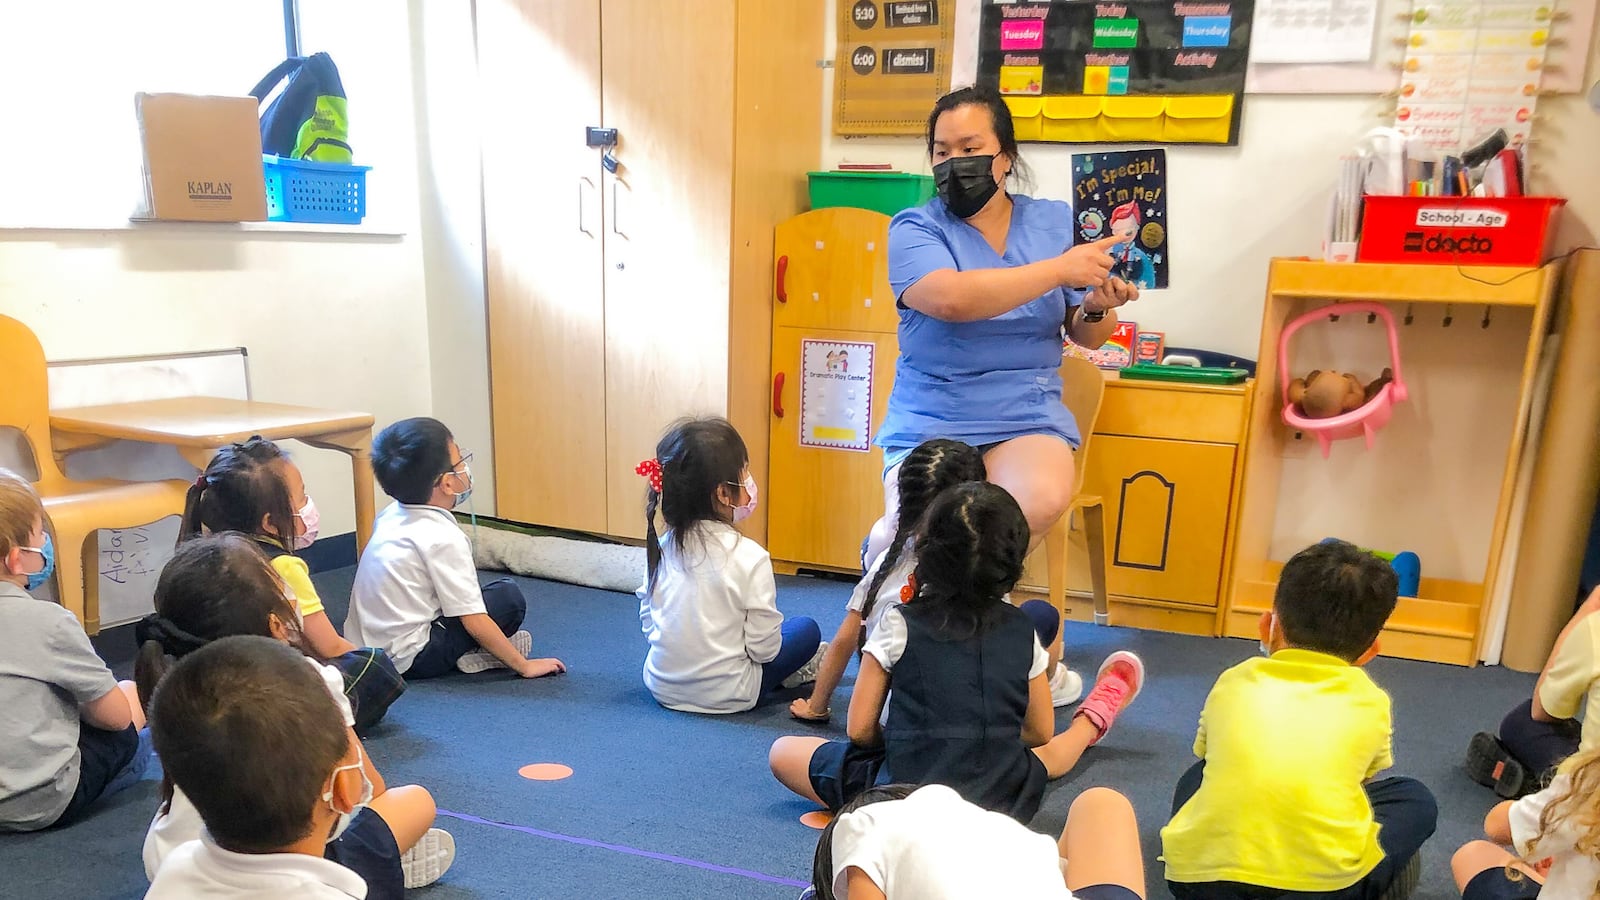 A masked teacher reads a book to students, who are seated on a rug in front of them.